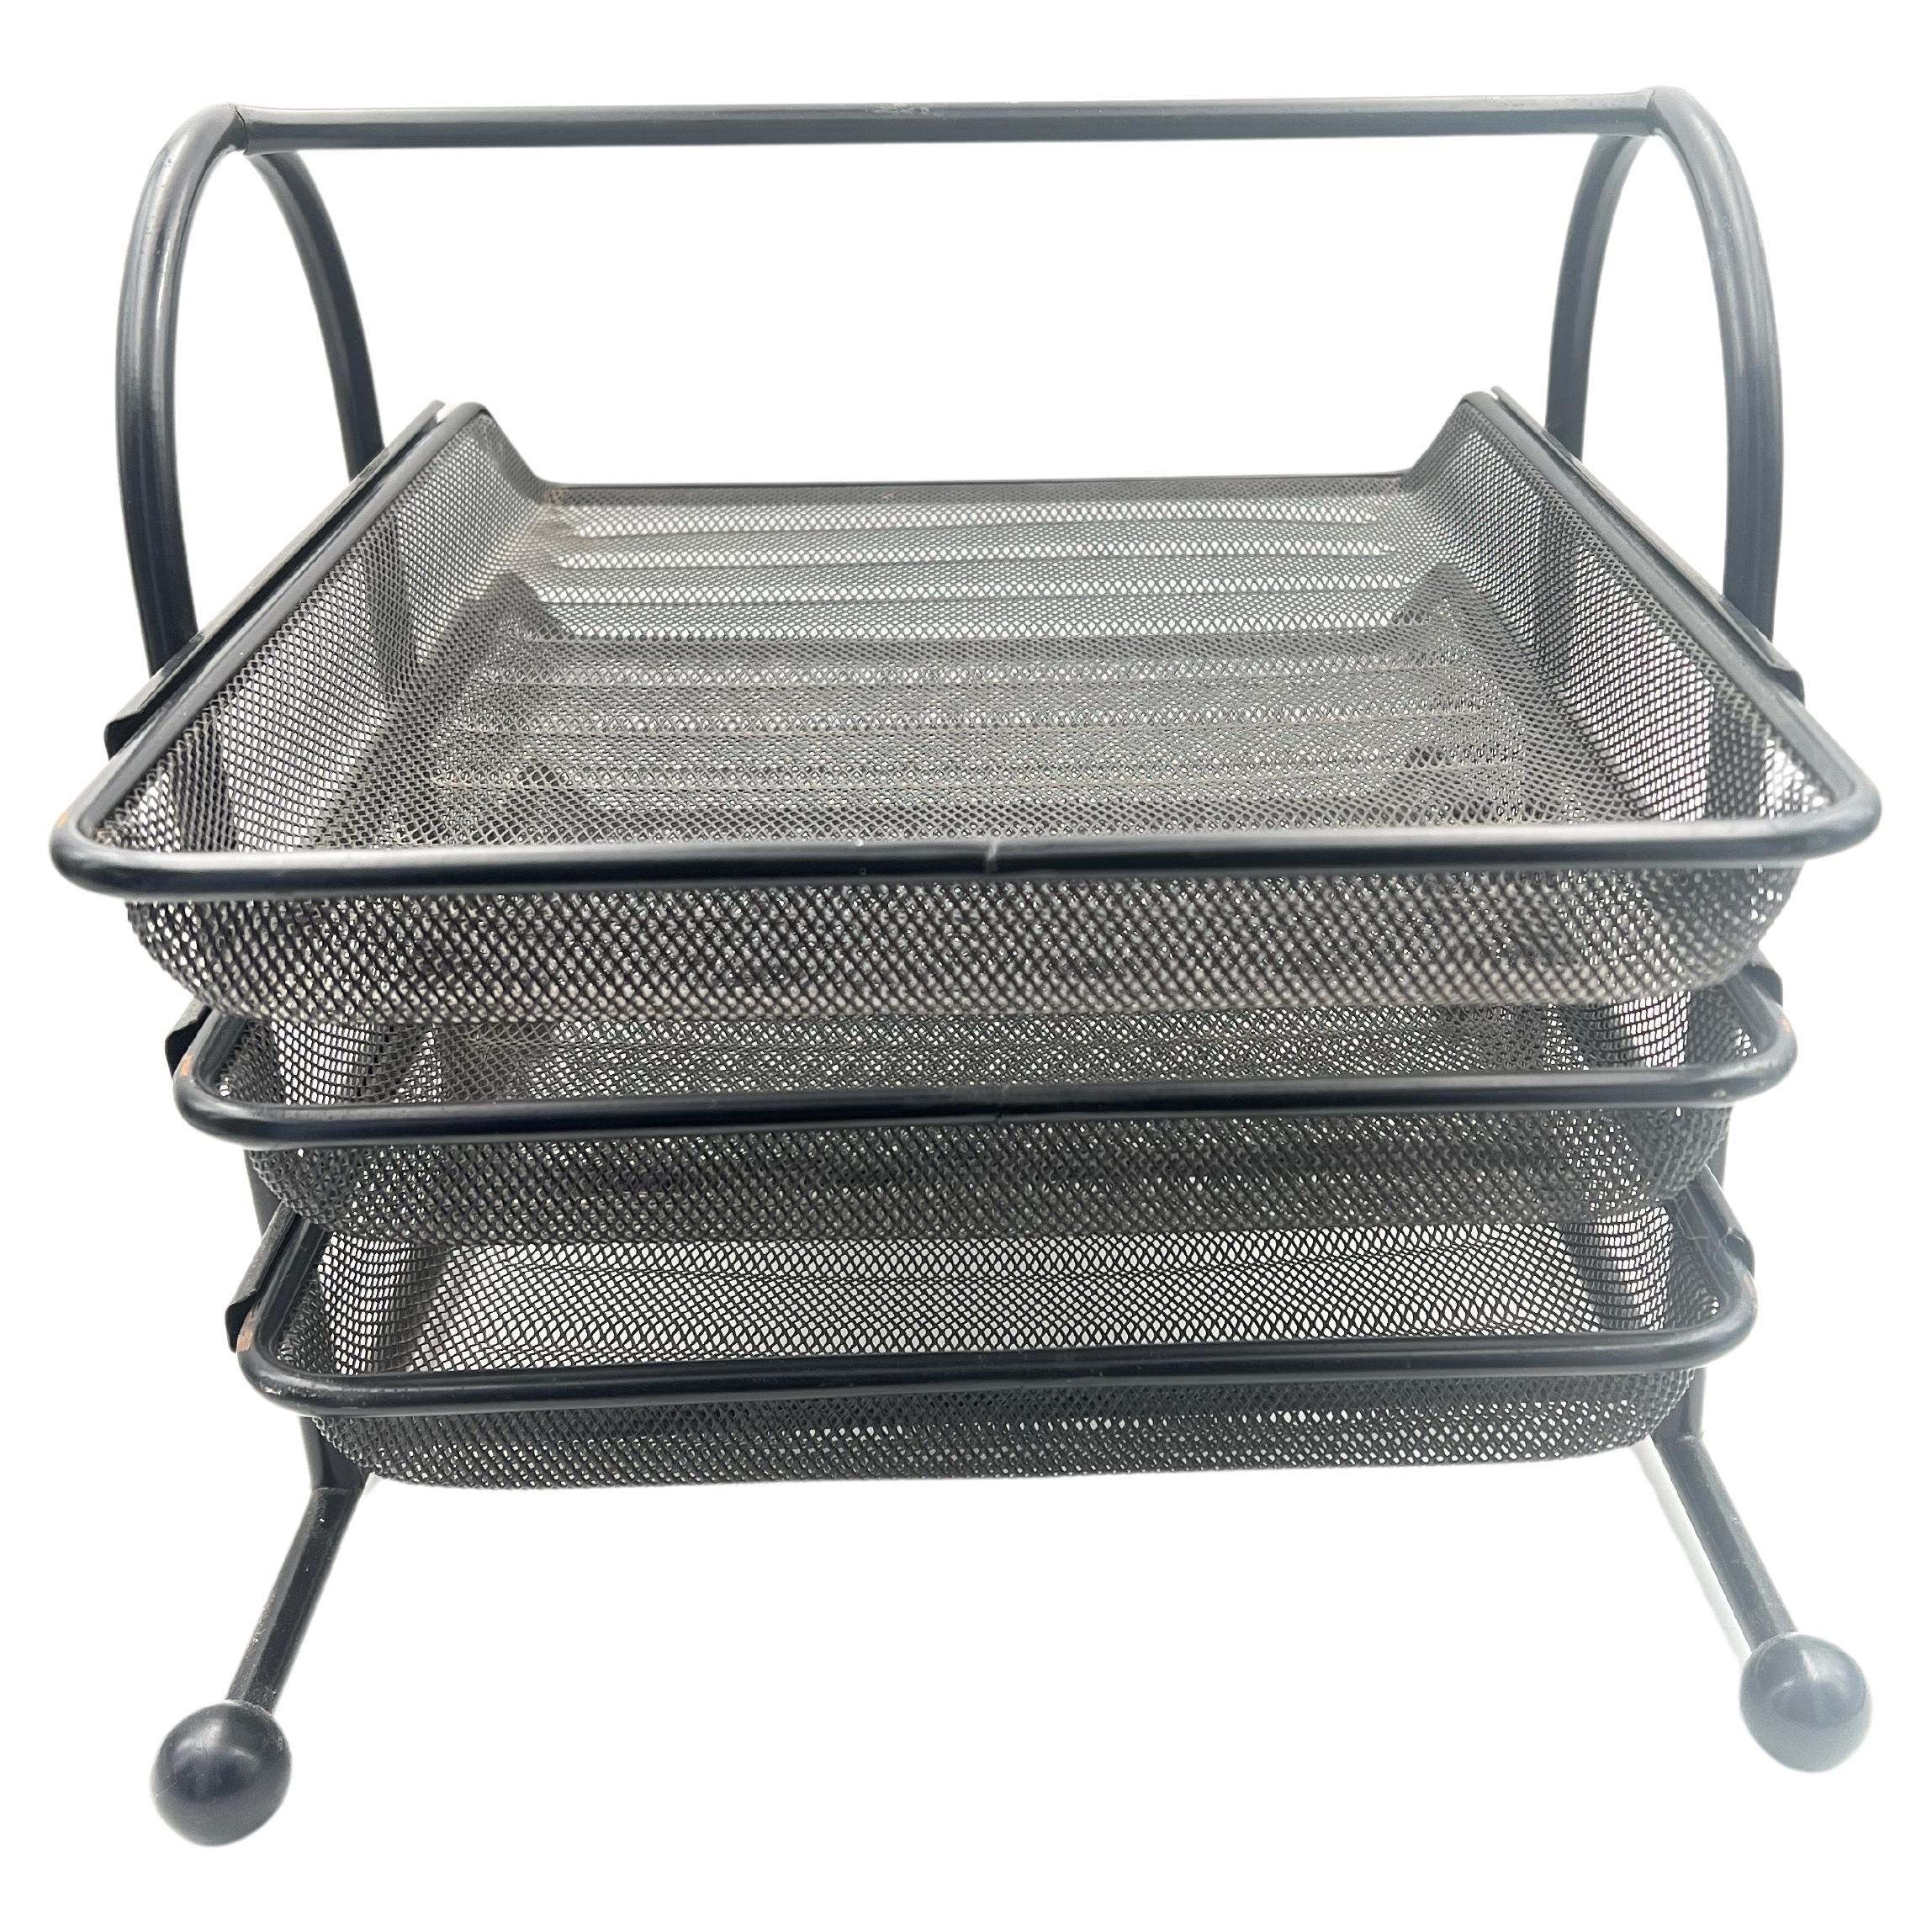 A wonderful Post-Modern black enamel perforated metal desk tray with sliding trays versatile and unique.